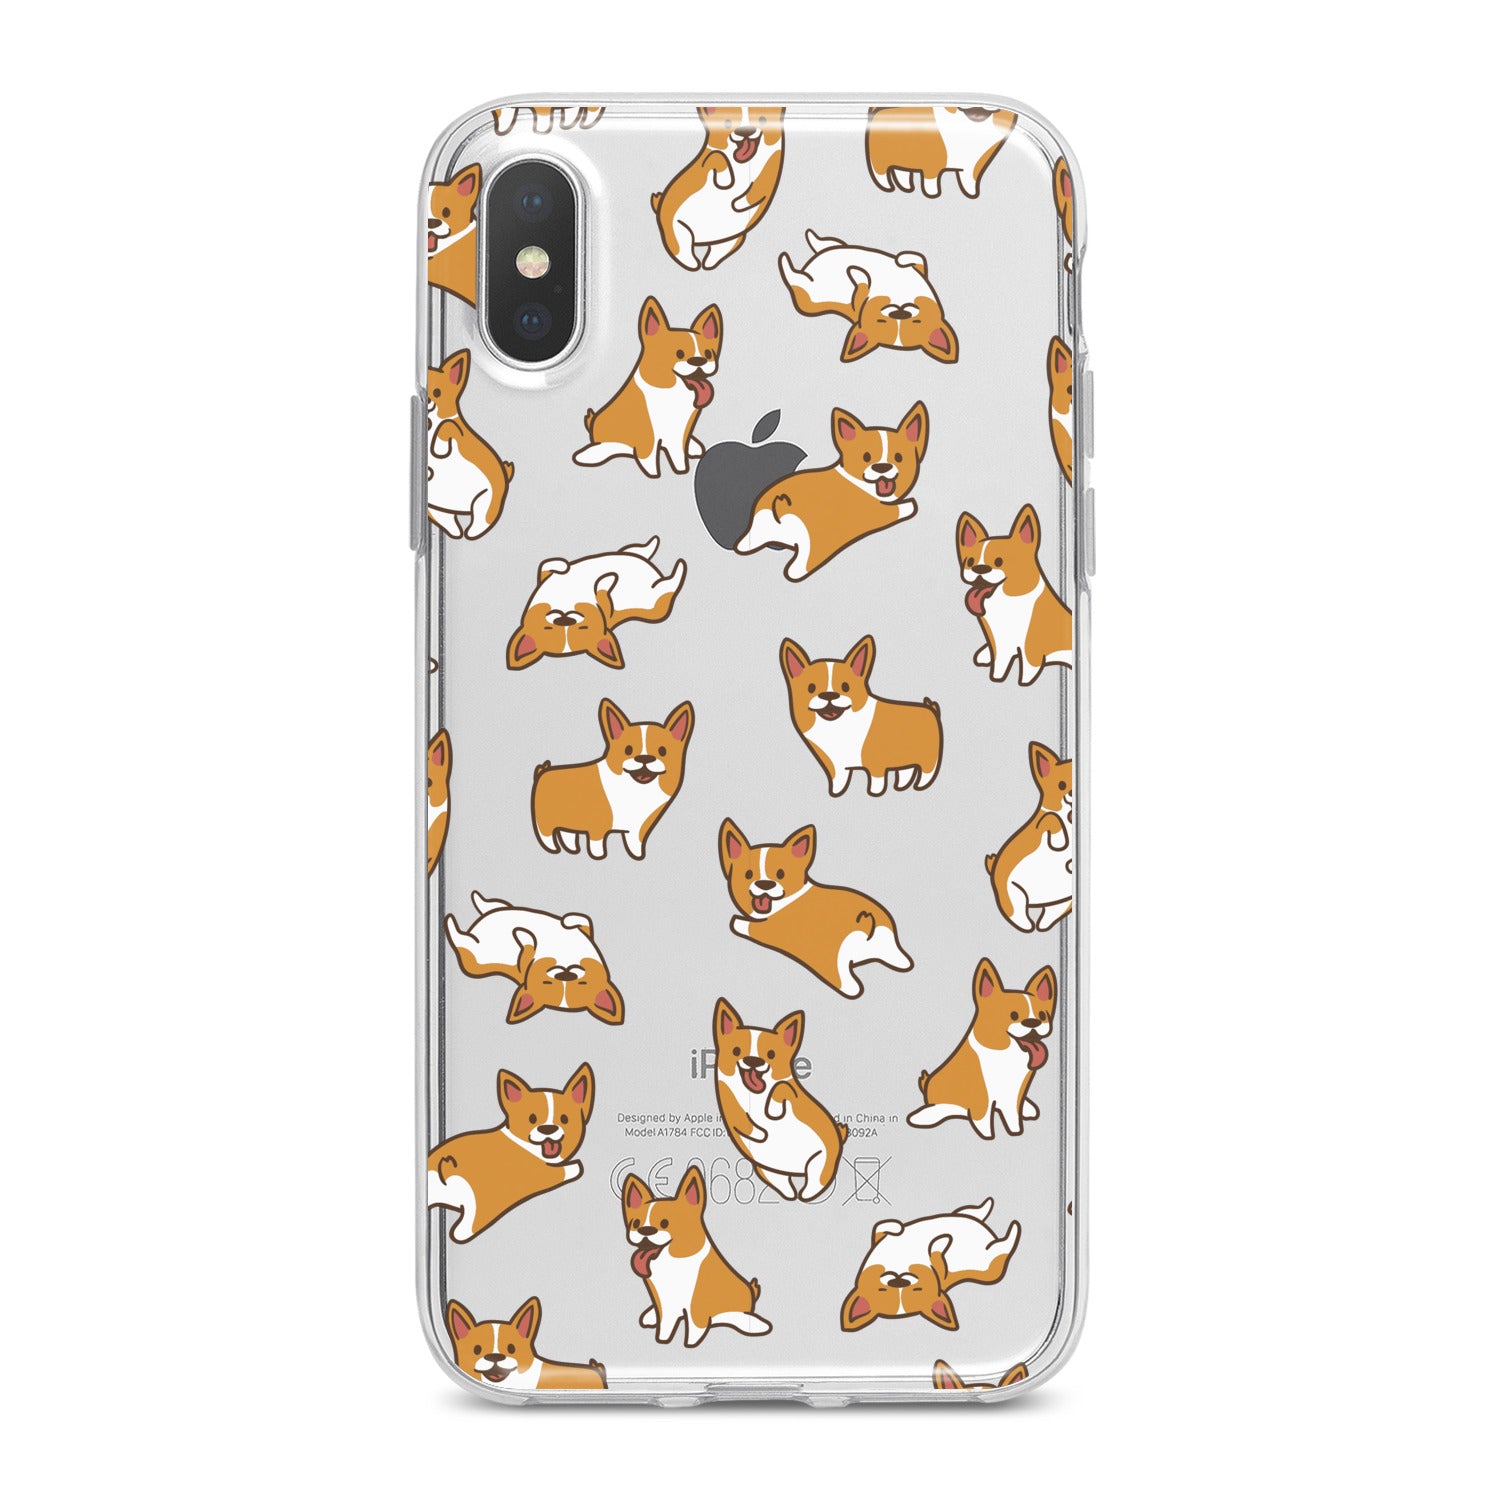 Lex Altern Cute Corgi Puppies Phone Case for your iPhone & Android phone.